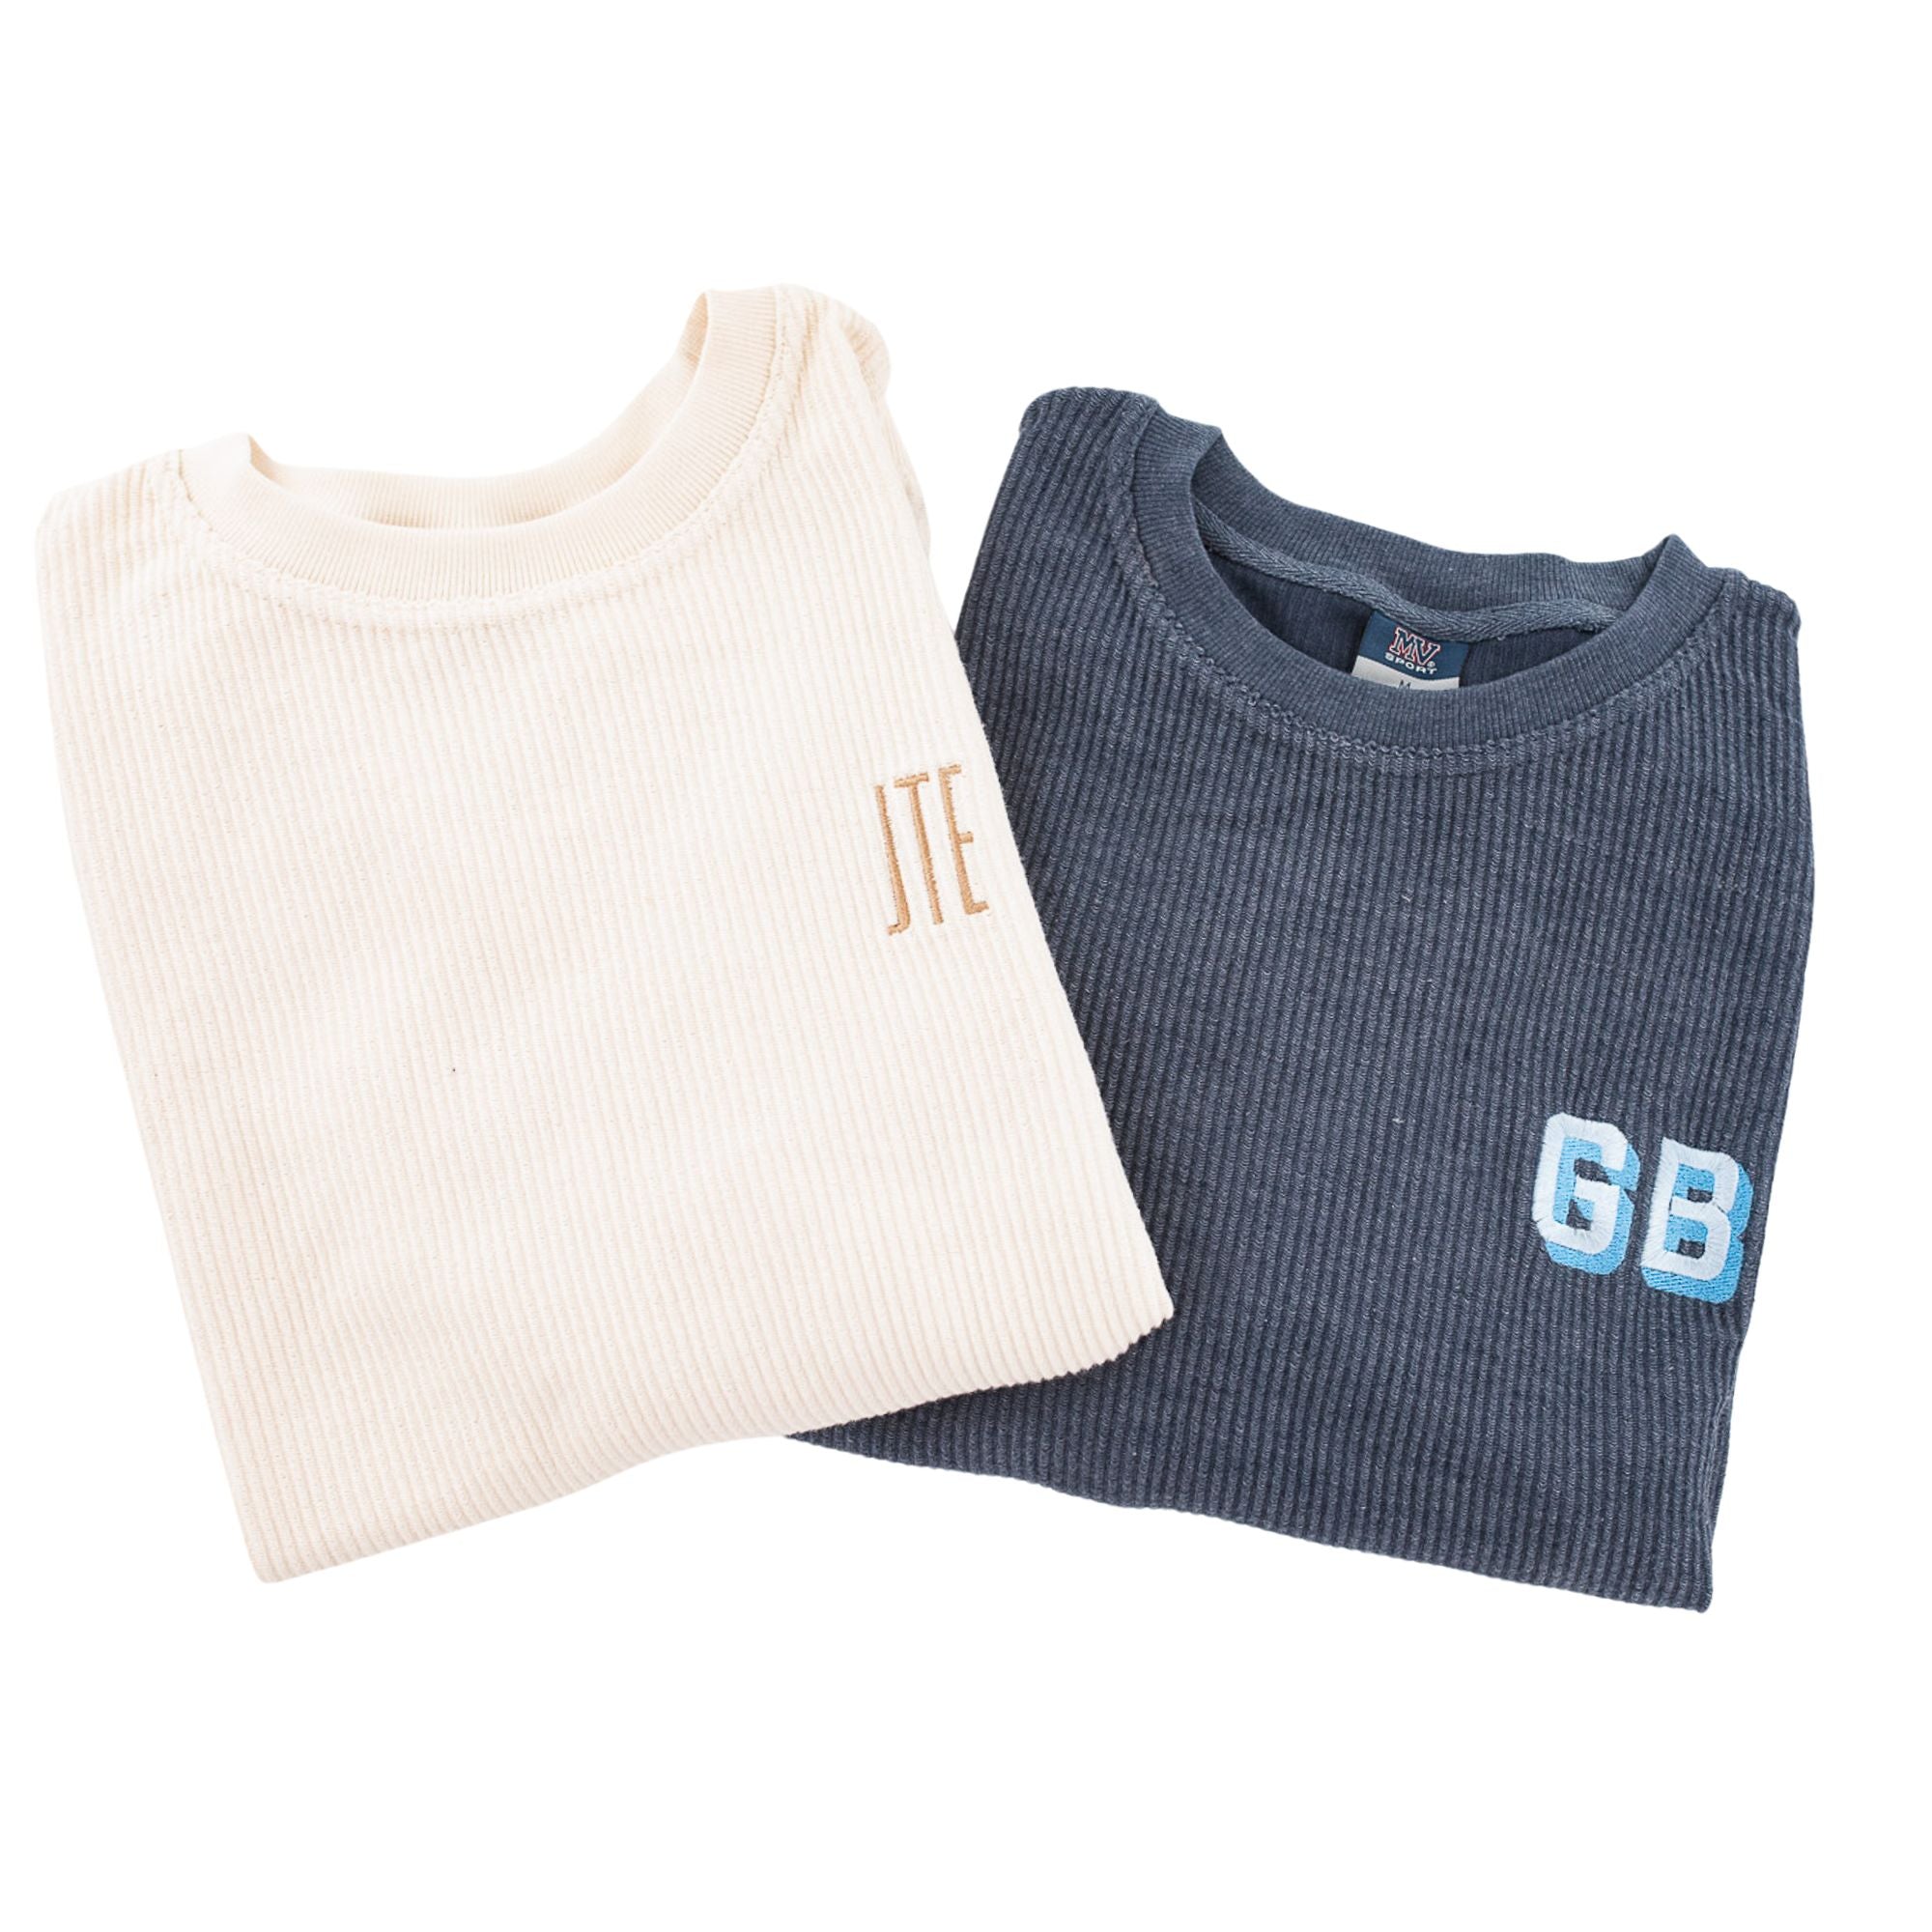 Two corded sweatshirts one in navy and one in cream have monograms on the left chest